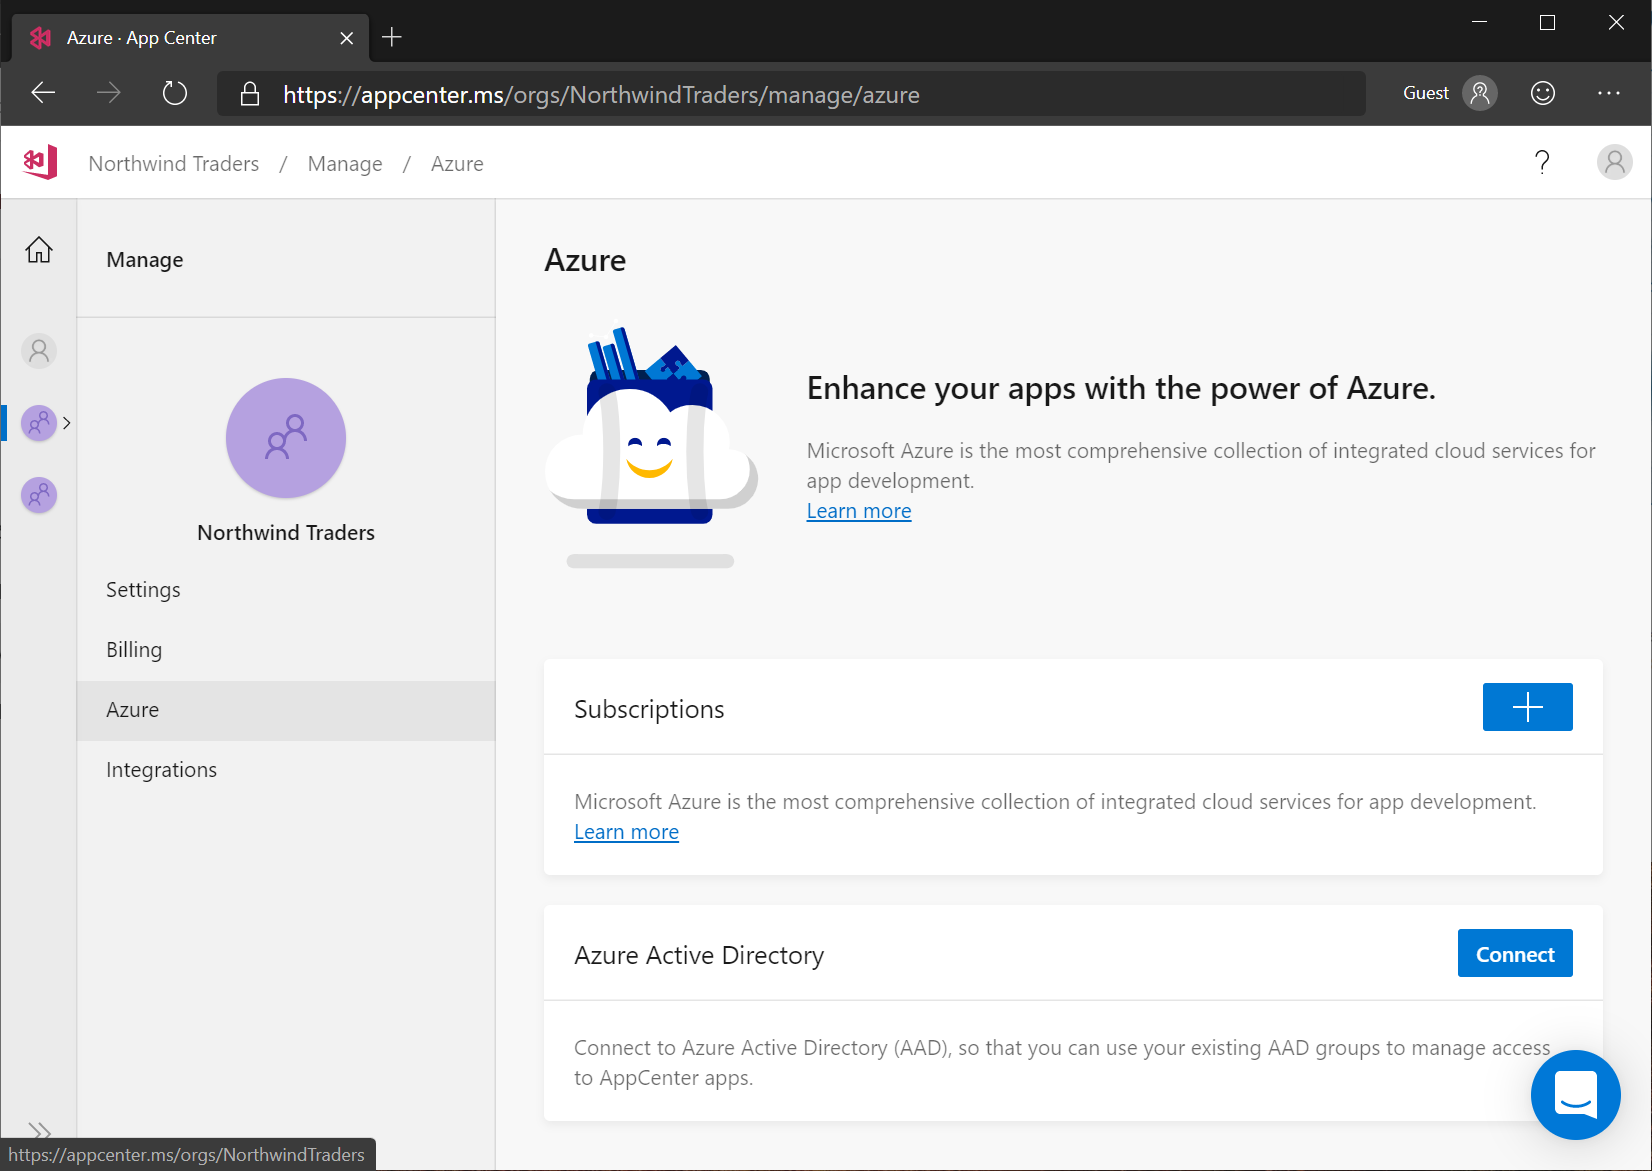 App Center: Manage your organization's connection to Azure